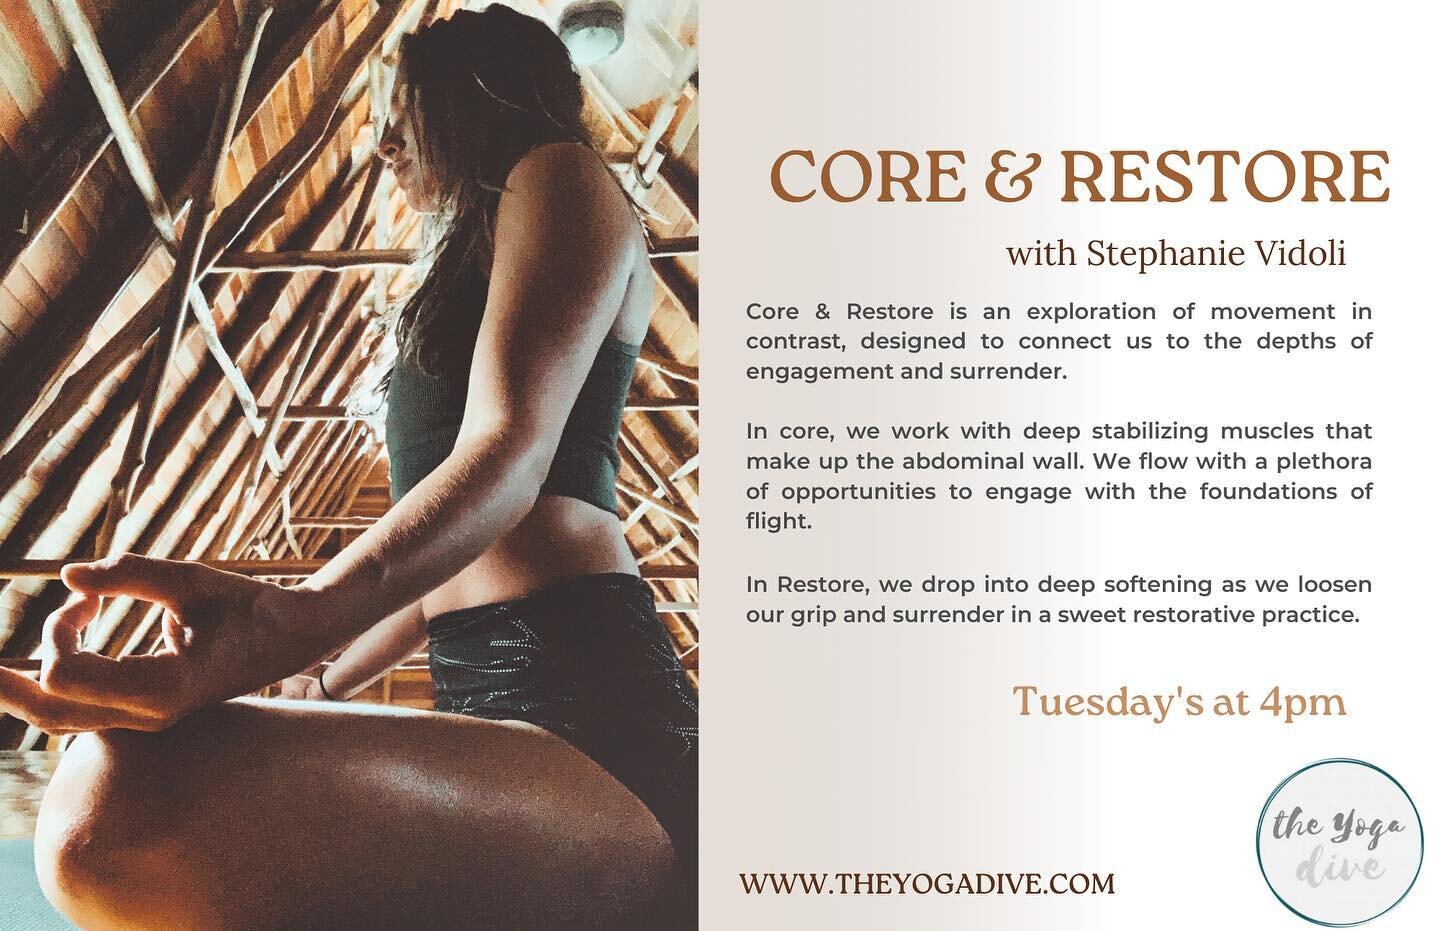 Tomorrow!!

Core &amp; Restore
Tuesday at 4 pm @theyogadive 

#yoga #grassvalley #nevadacity #core